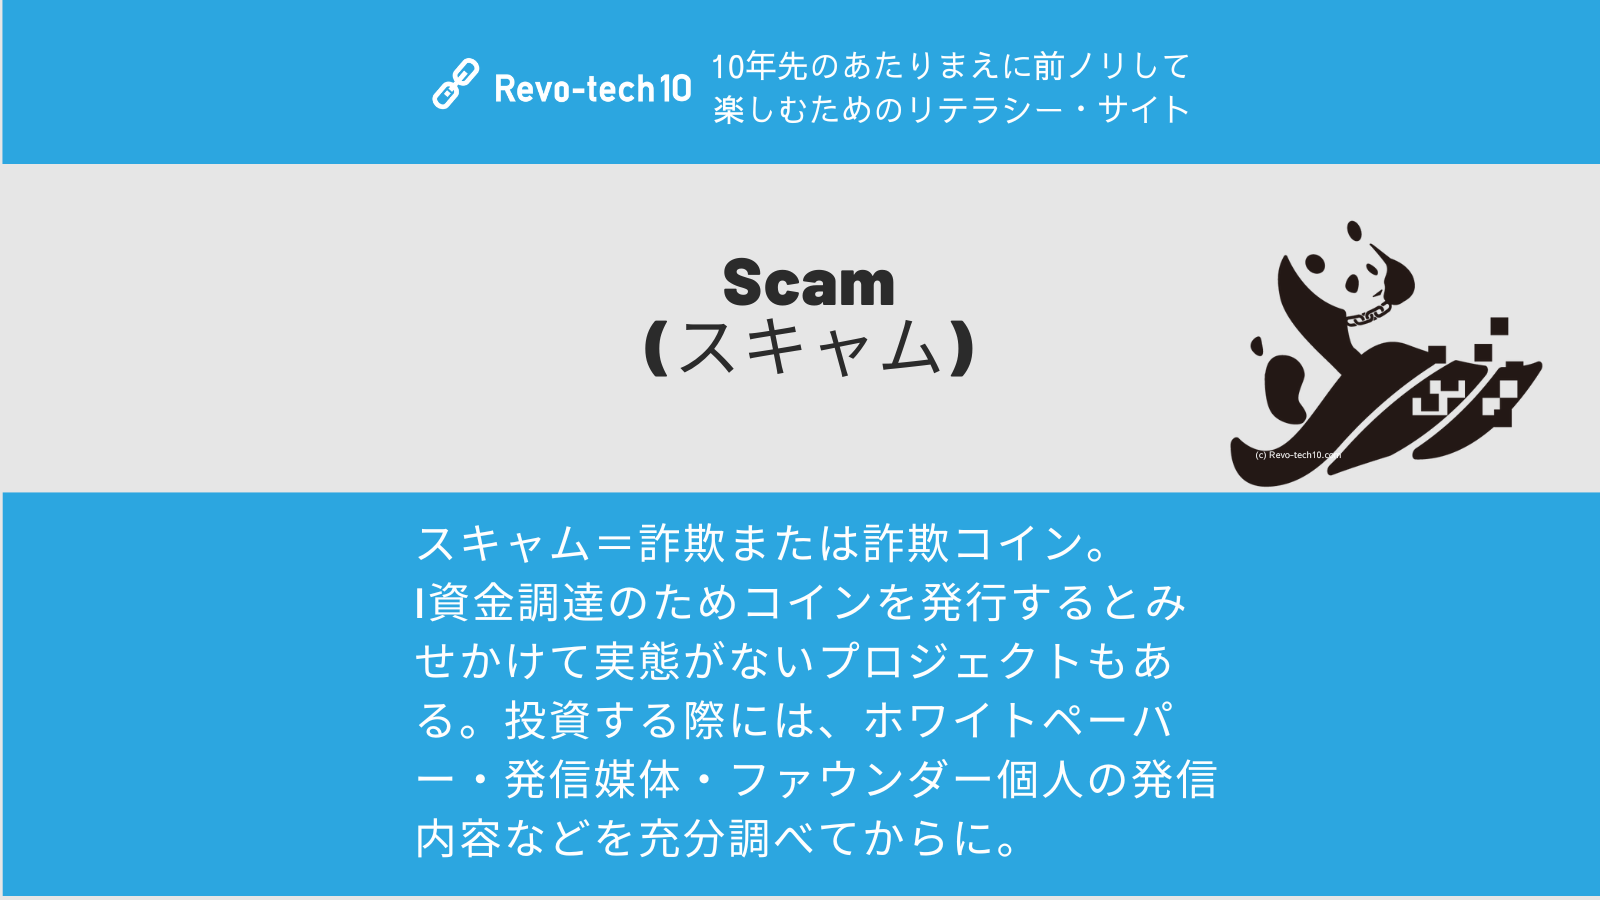 0068_Scam(スキャム)＝詐欺または詐欺コイン。